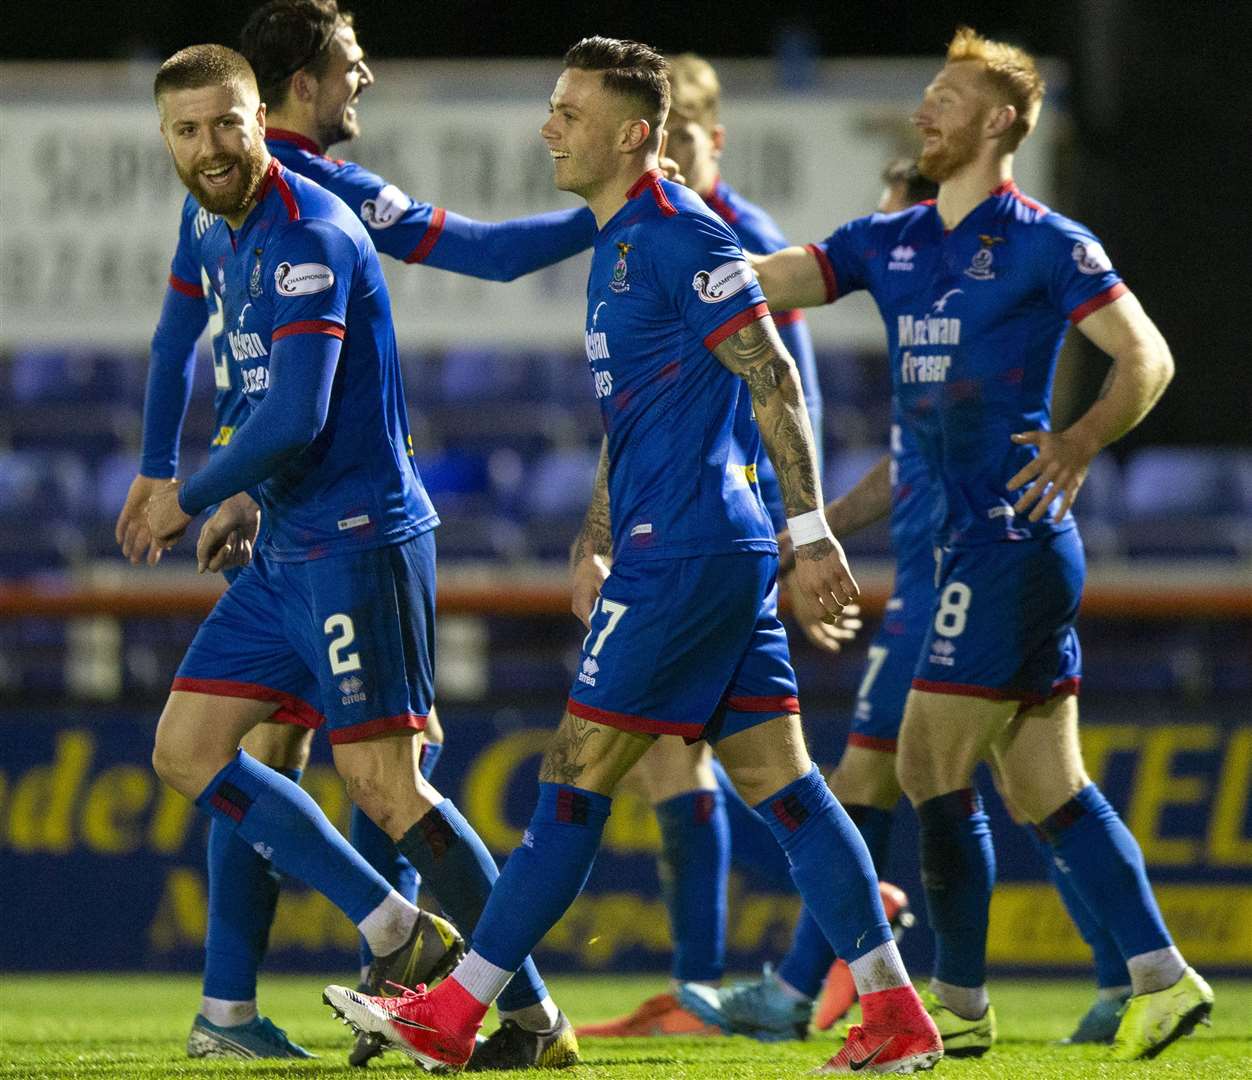 Miles Storey and Jordan White scored the goals as Inverness defeated Ayr United in the Championship last weekend.